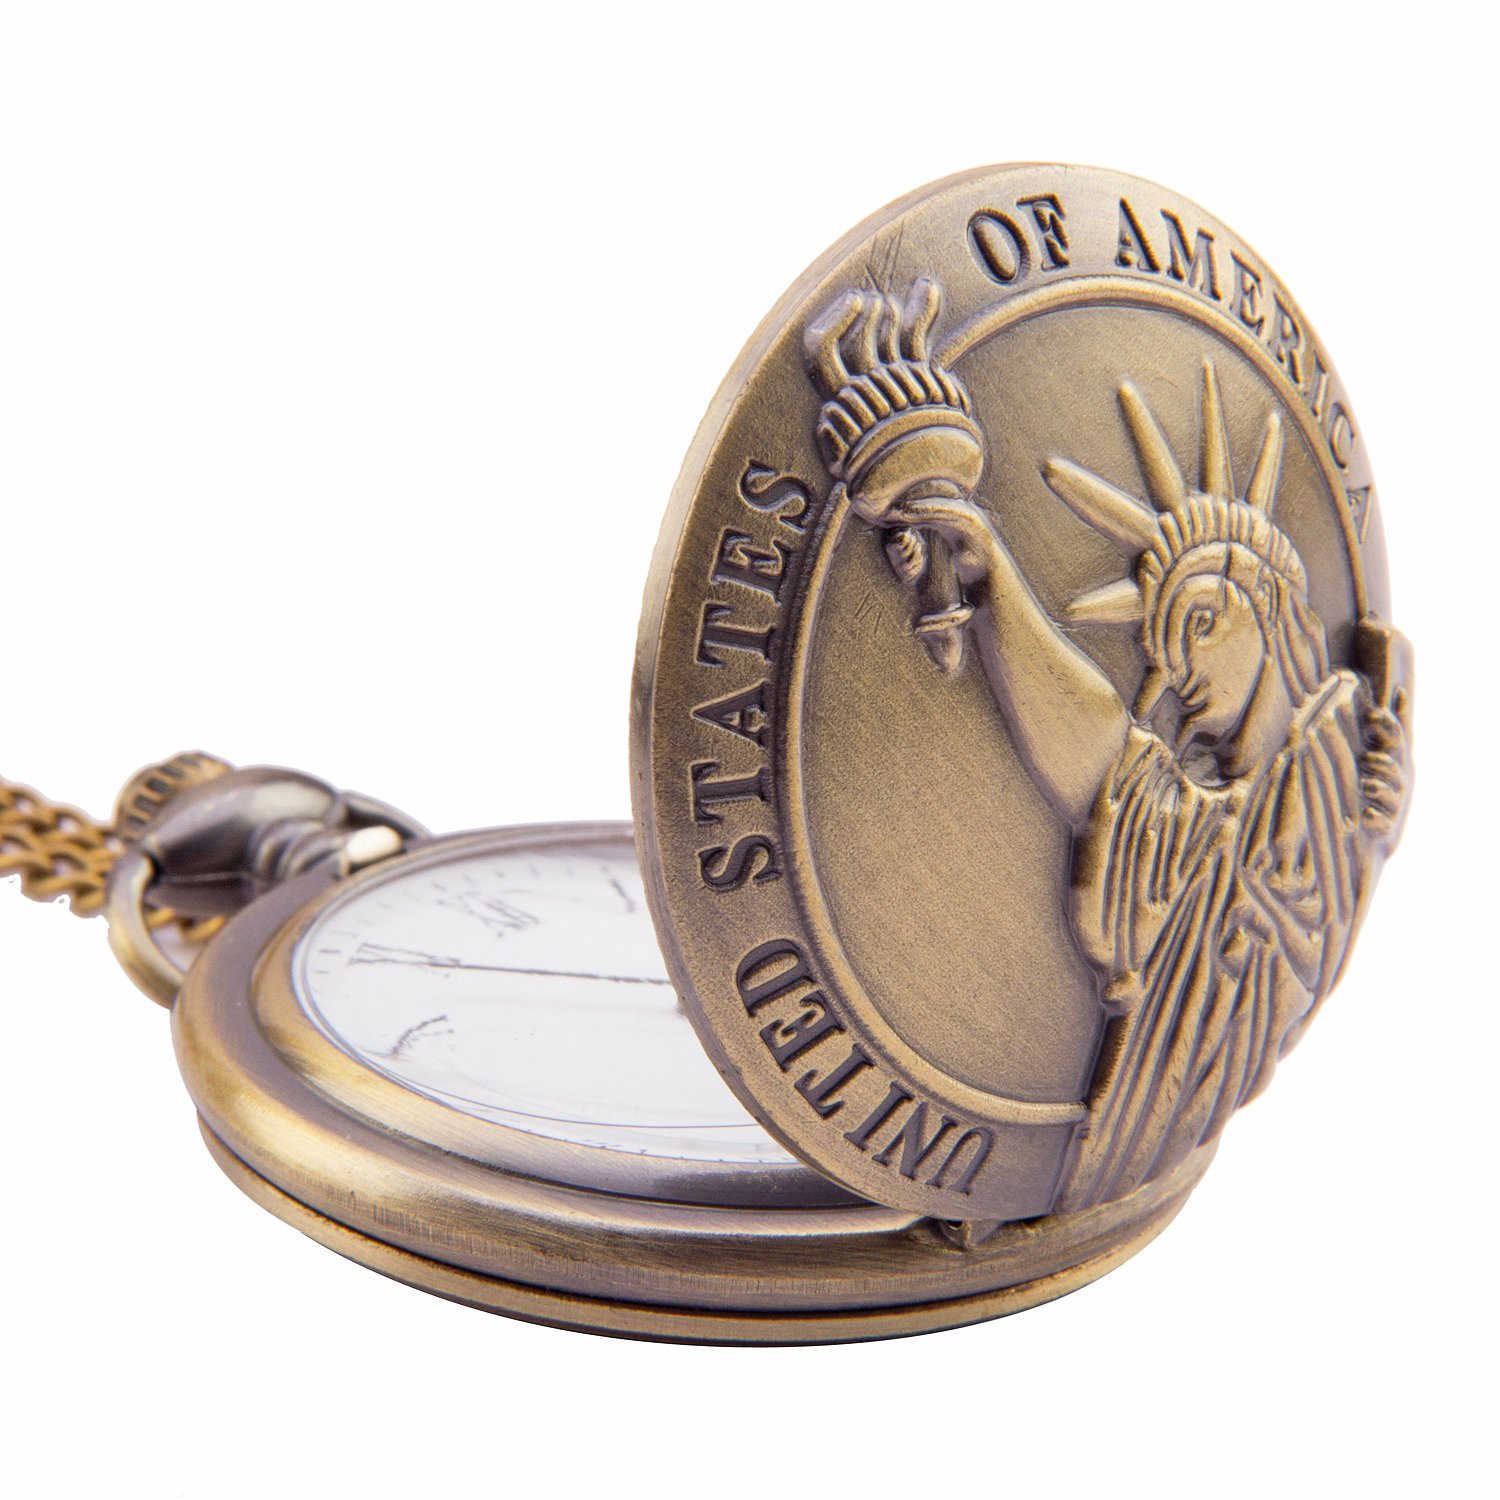 Waterproof Portable Digital Quartz Nurse Pocket Watch With Alarm Keychain  Perfect XMAS Gift And Creative Party Supplies Q378 From Homegardenjoy,  $1.16 | DHgate.Com